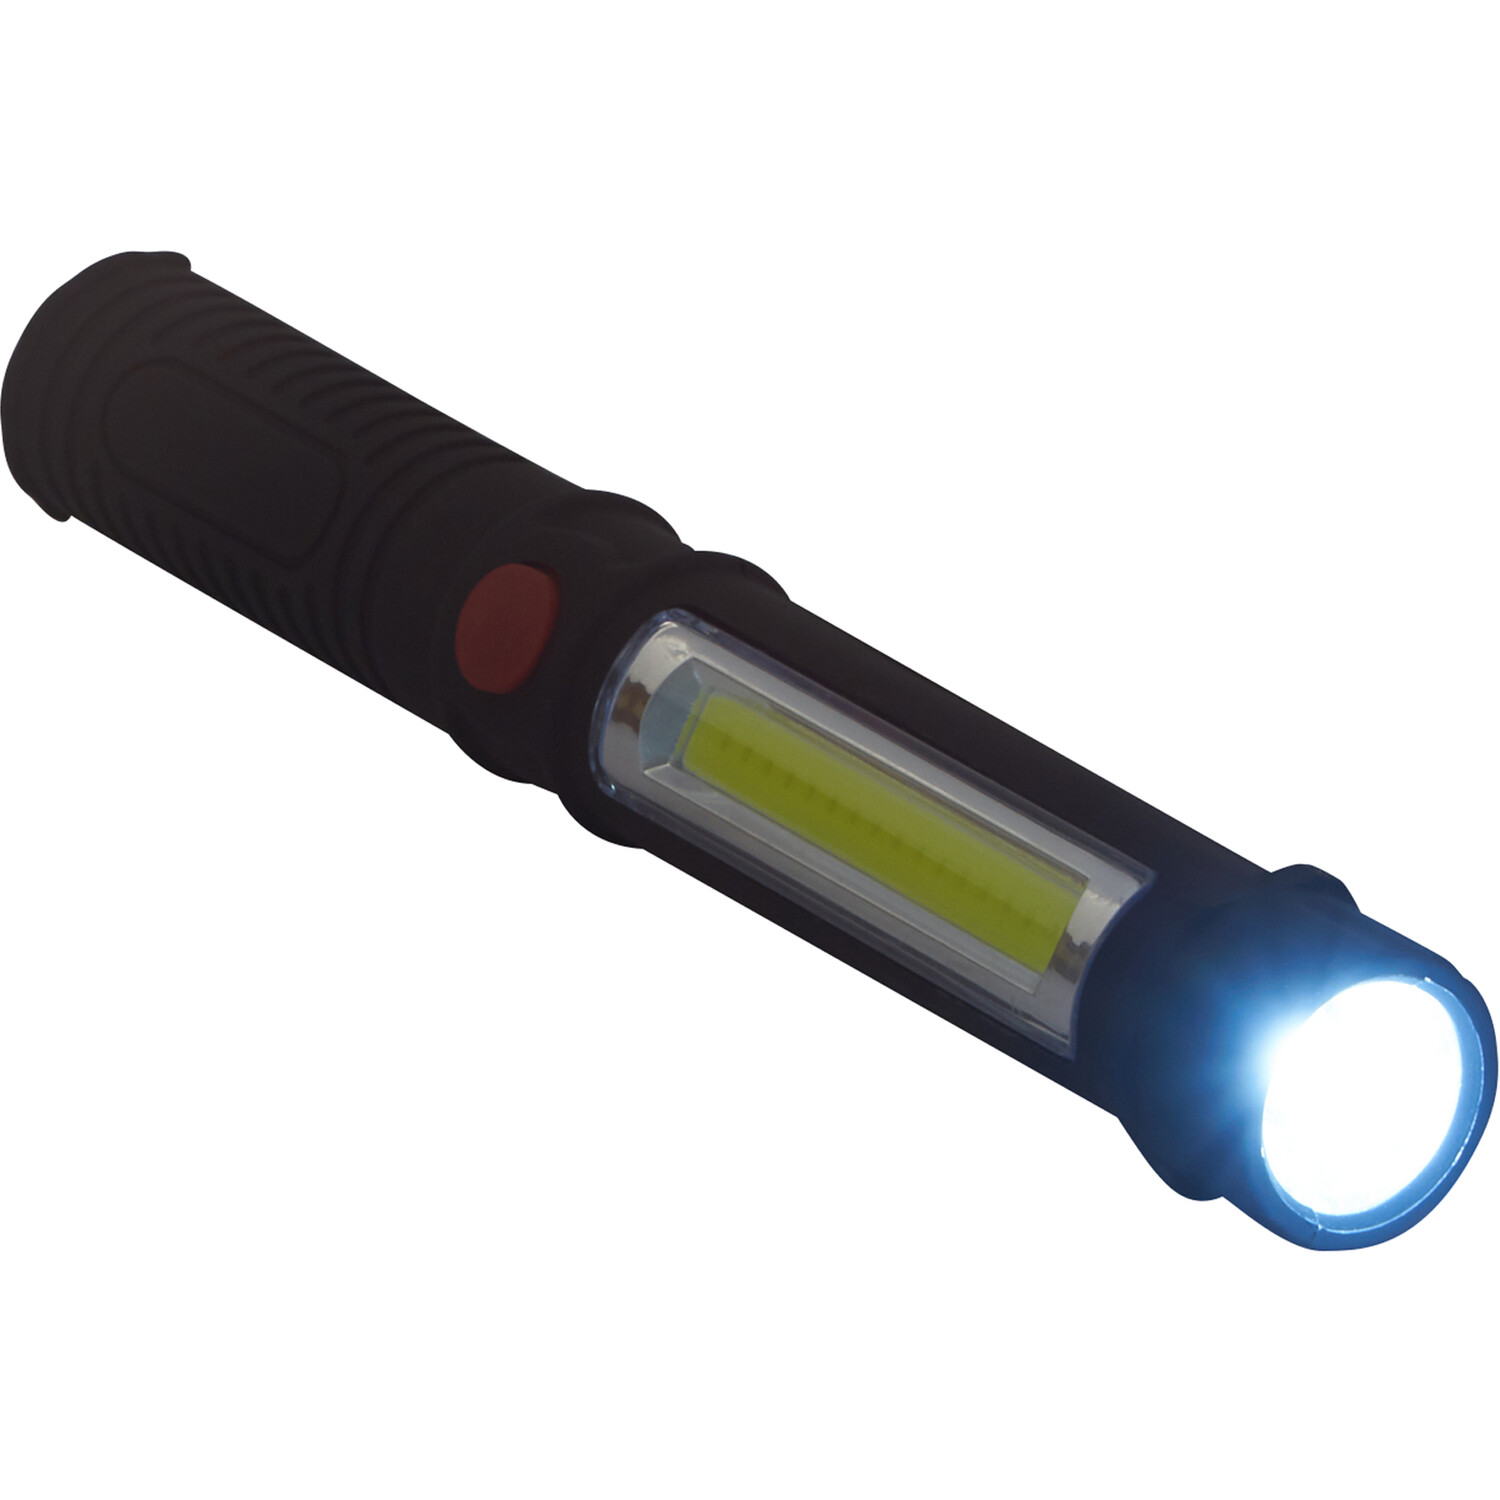 Penlight and Torch Image 4